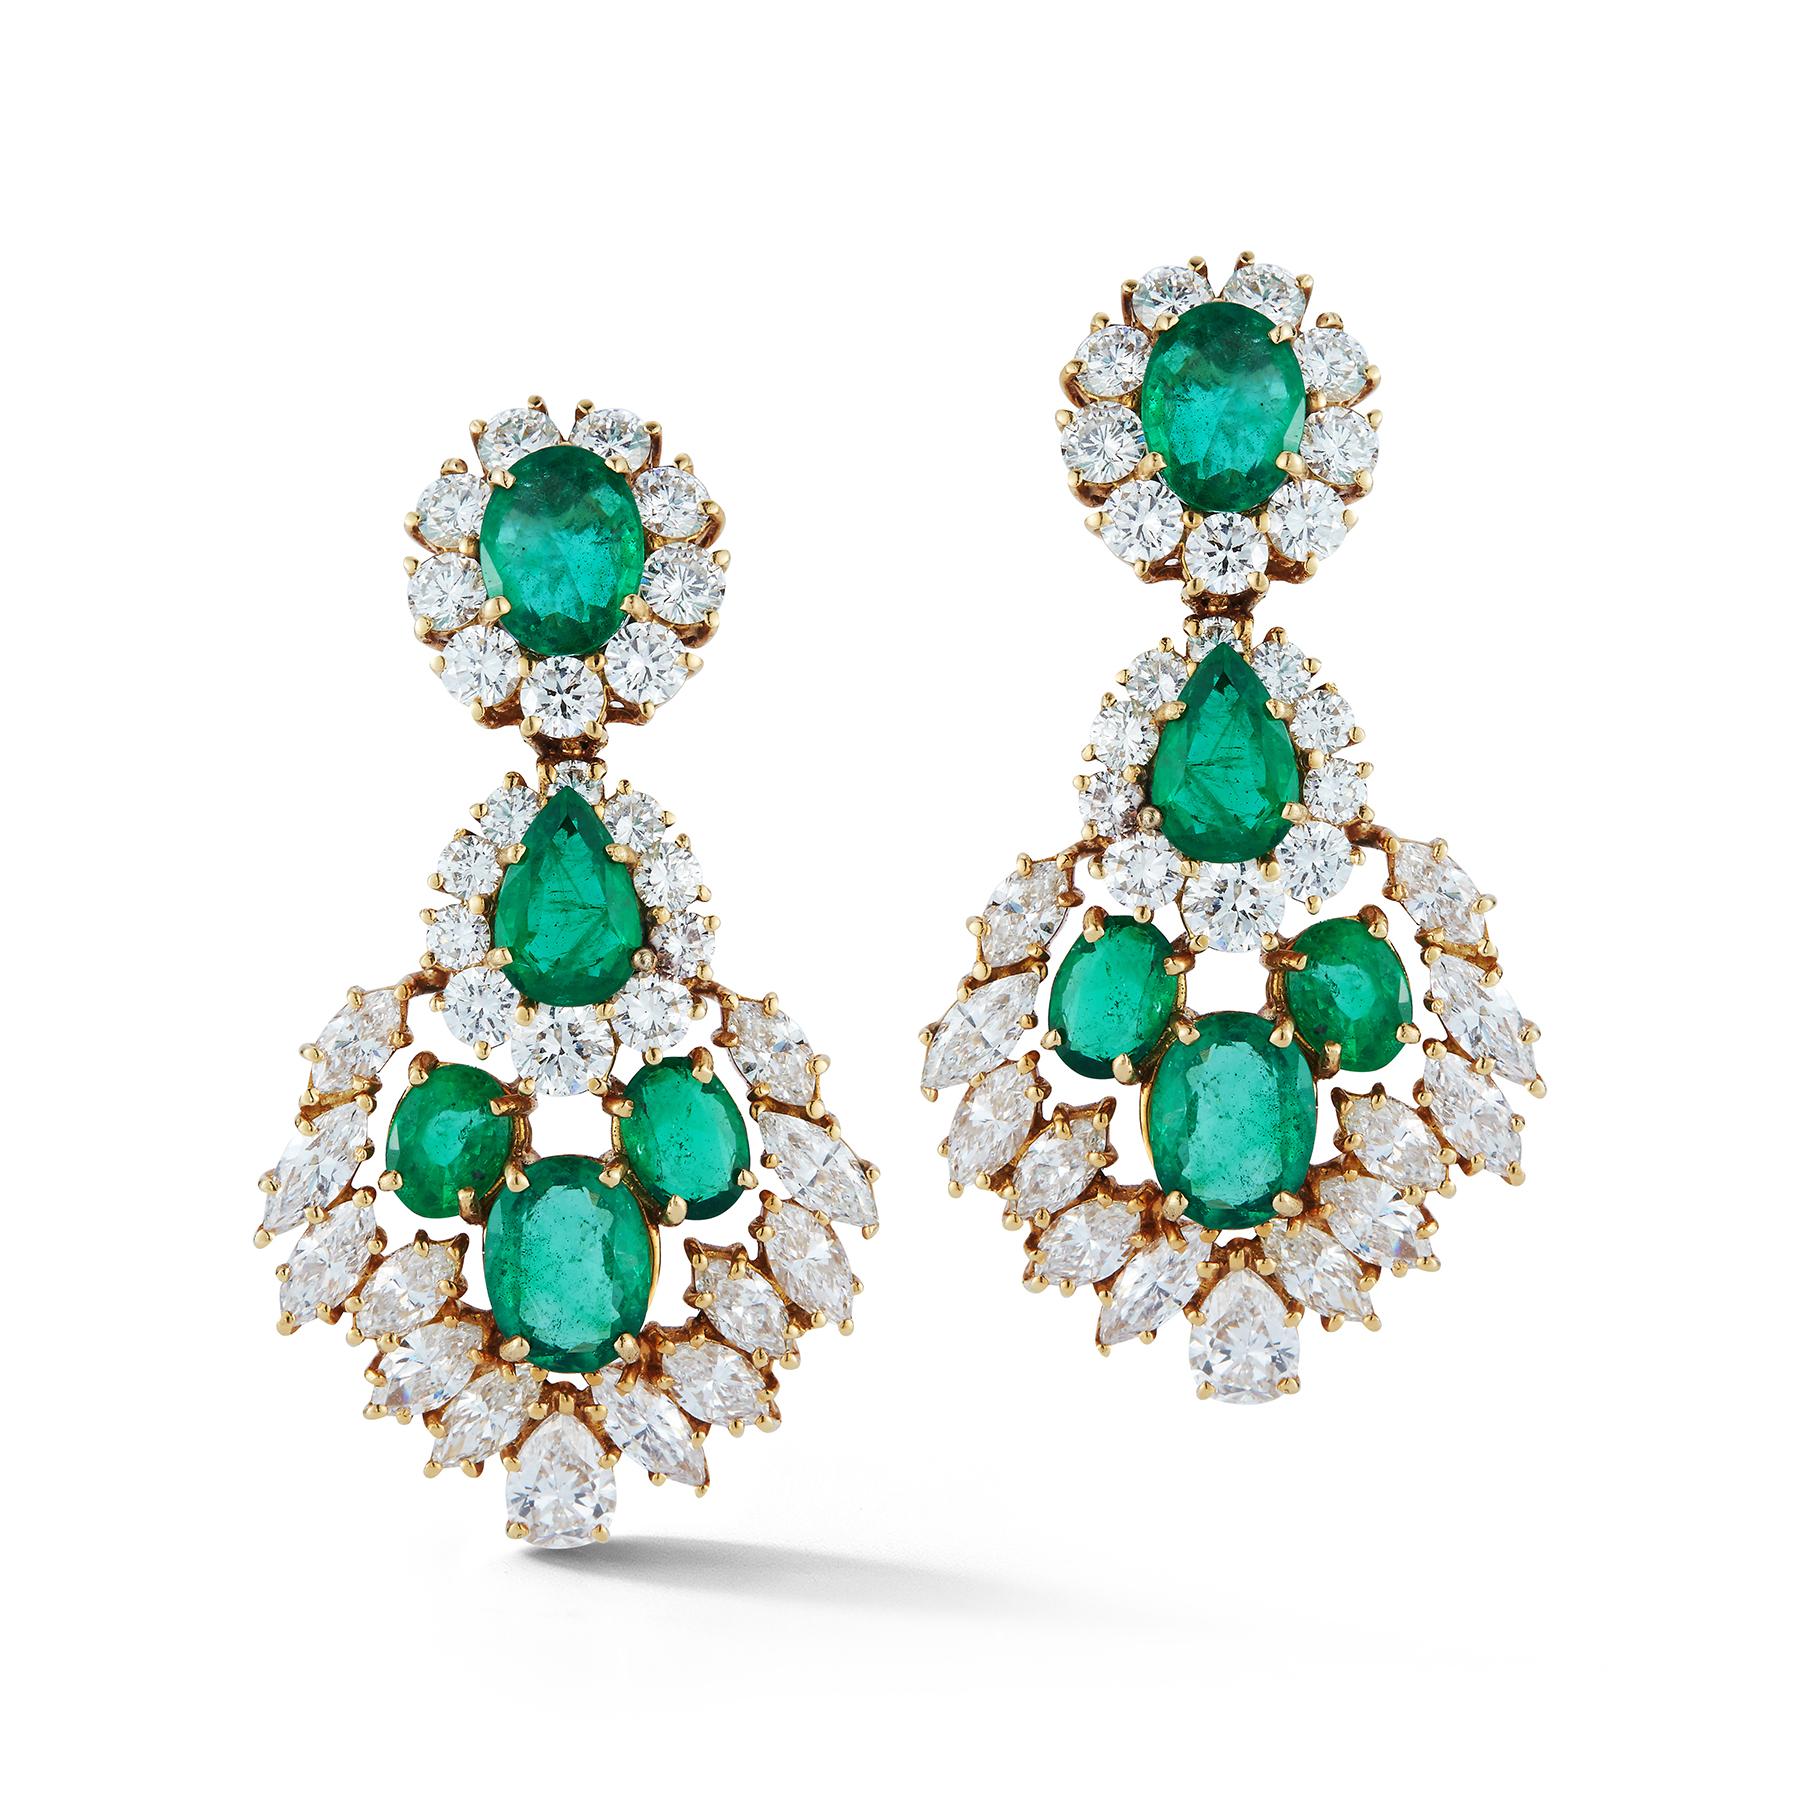 Emerald and Diamond Earrings

8 oval emeralds and 2 Pear shape emeralds app 12.80 ct 
38 round diamonds app 5.27 ct and 24 marquee diamond app 5.47 ct

Made Circa 1960

14 Karat Yellow Gold